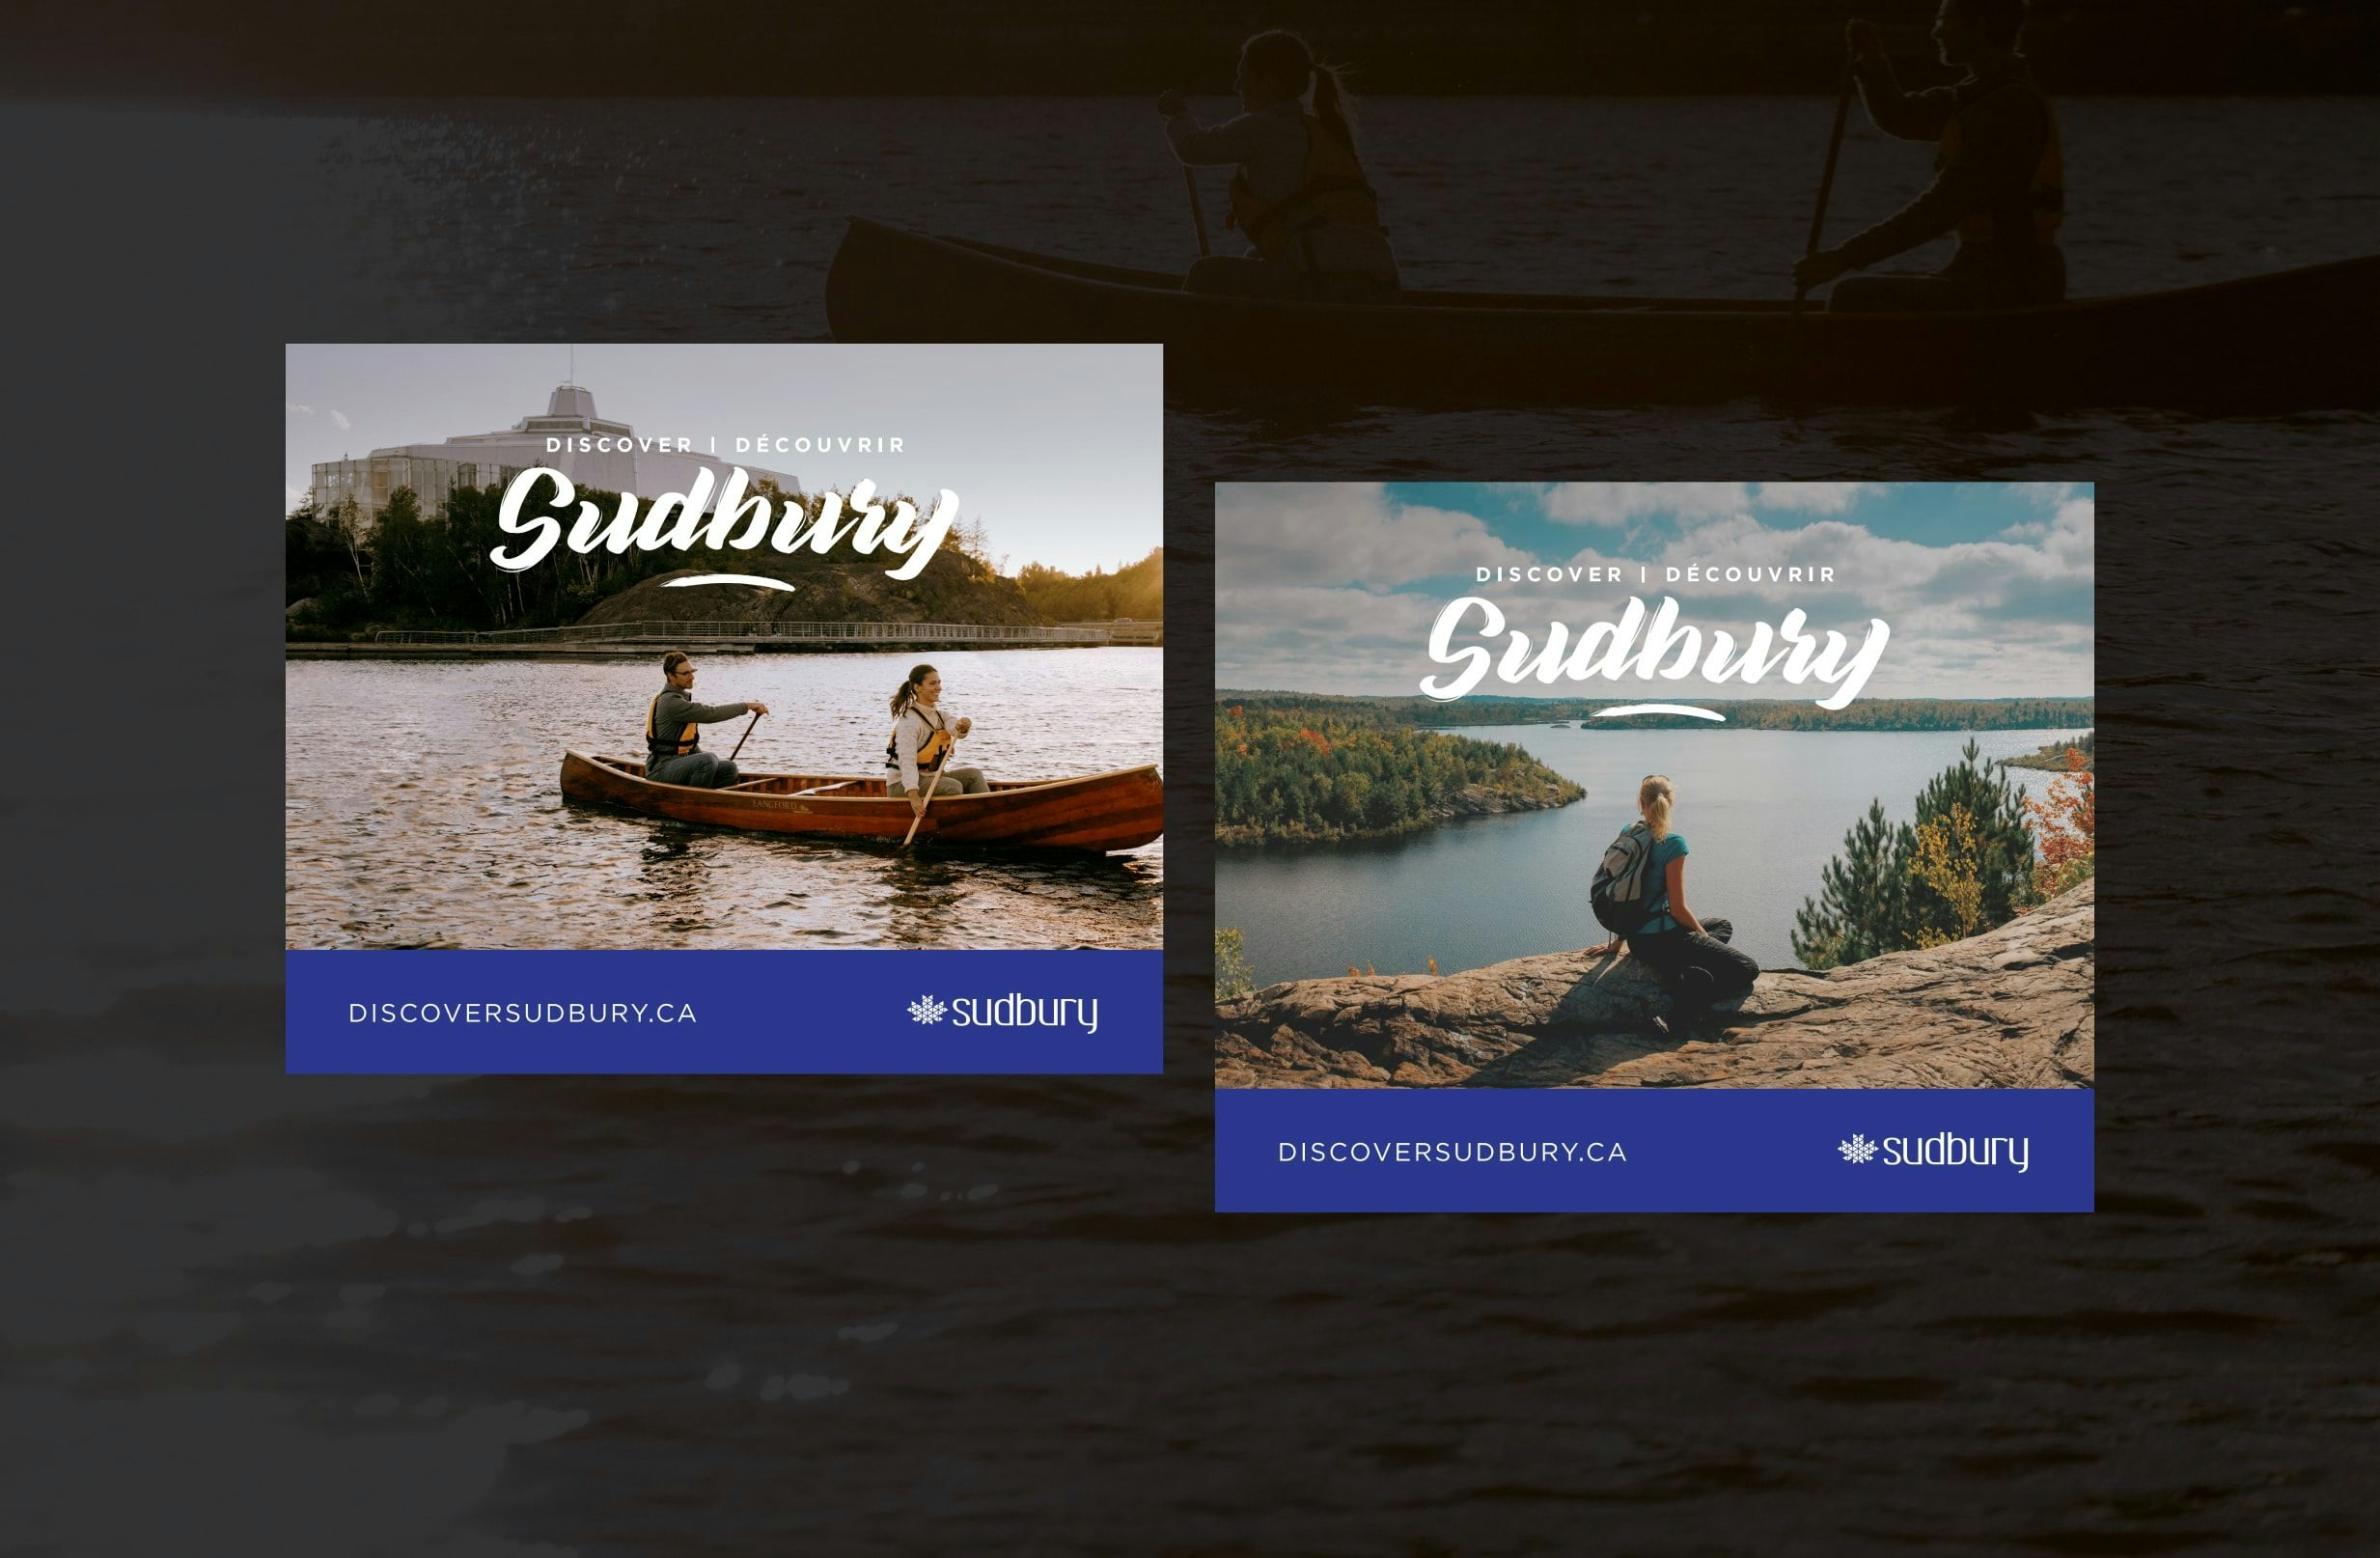 Side by sides examples of Explore Sudbury branded billboards featuring the outdoors